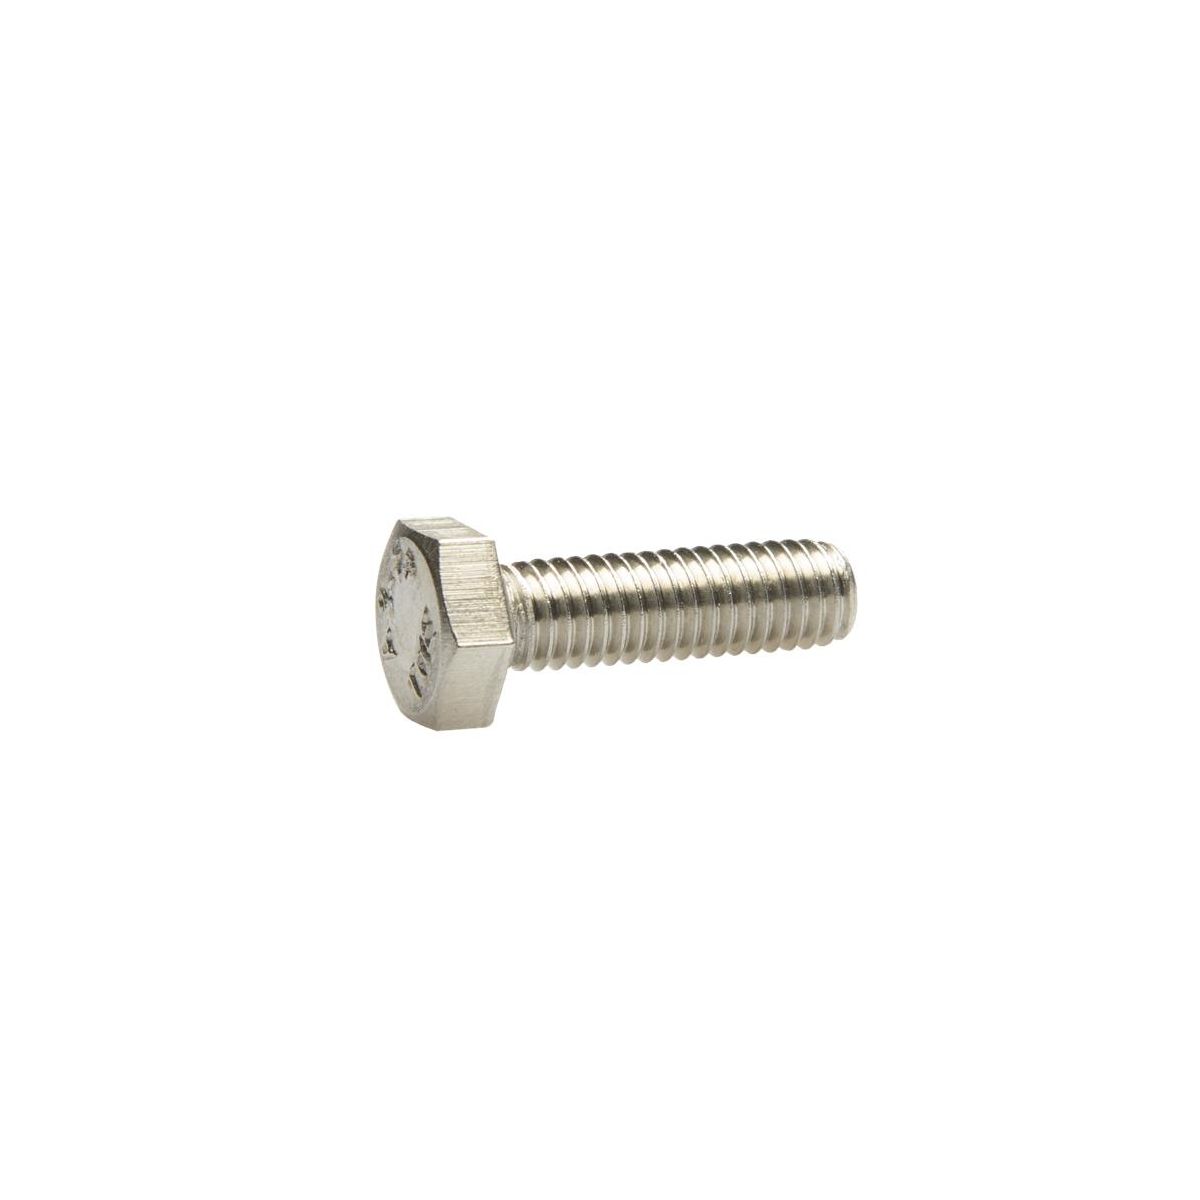 8g x 50mm Stainless Steel SS304 Decking Screw Kit With Clever Tool 3000pcs 